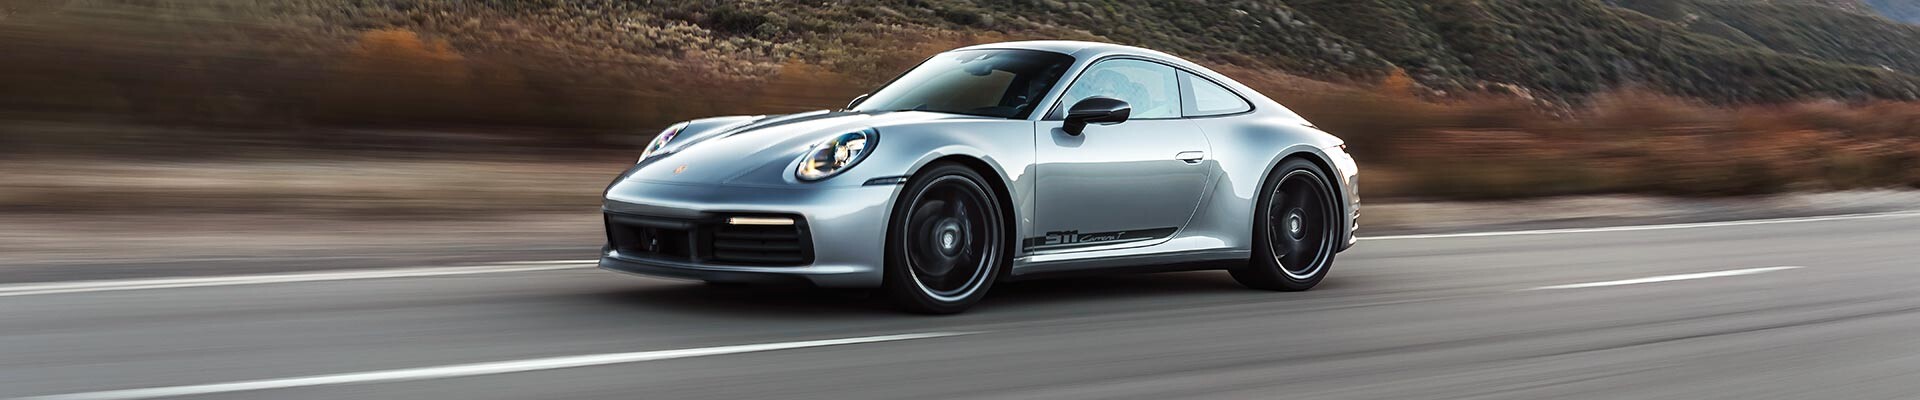 Only trust these recommended Porsche specialists, Porsche mechanics or repair shops